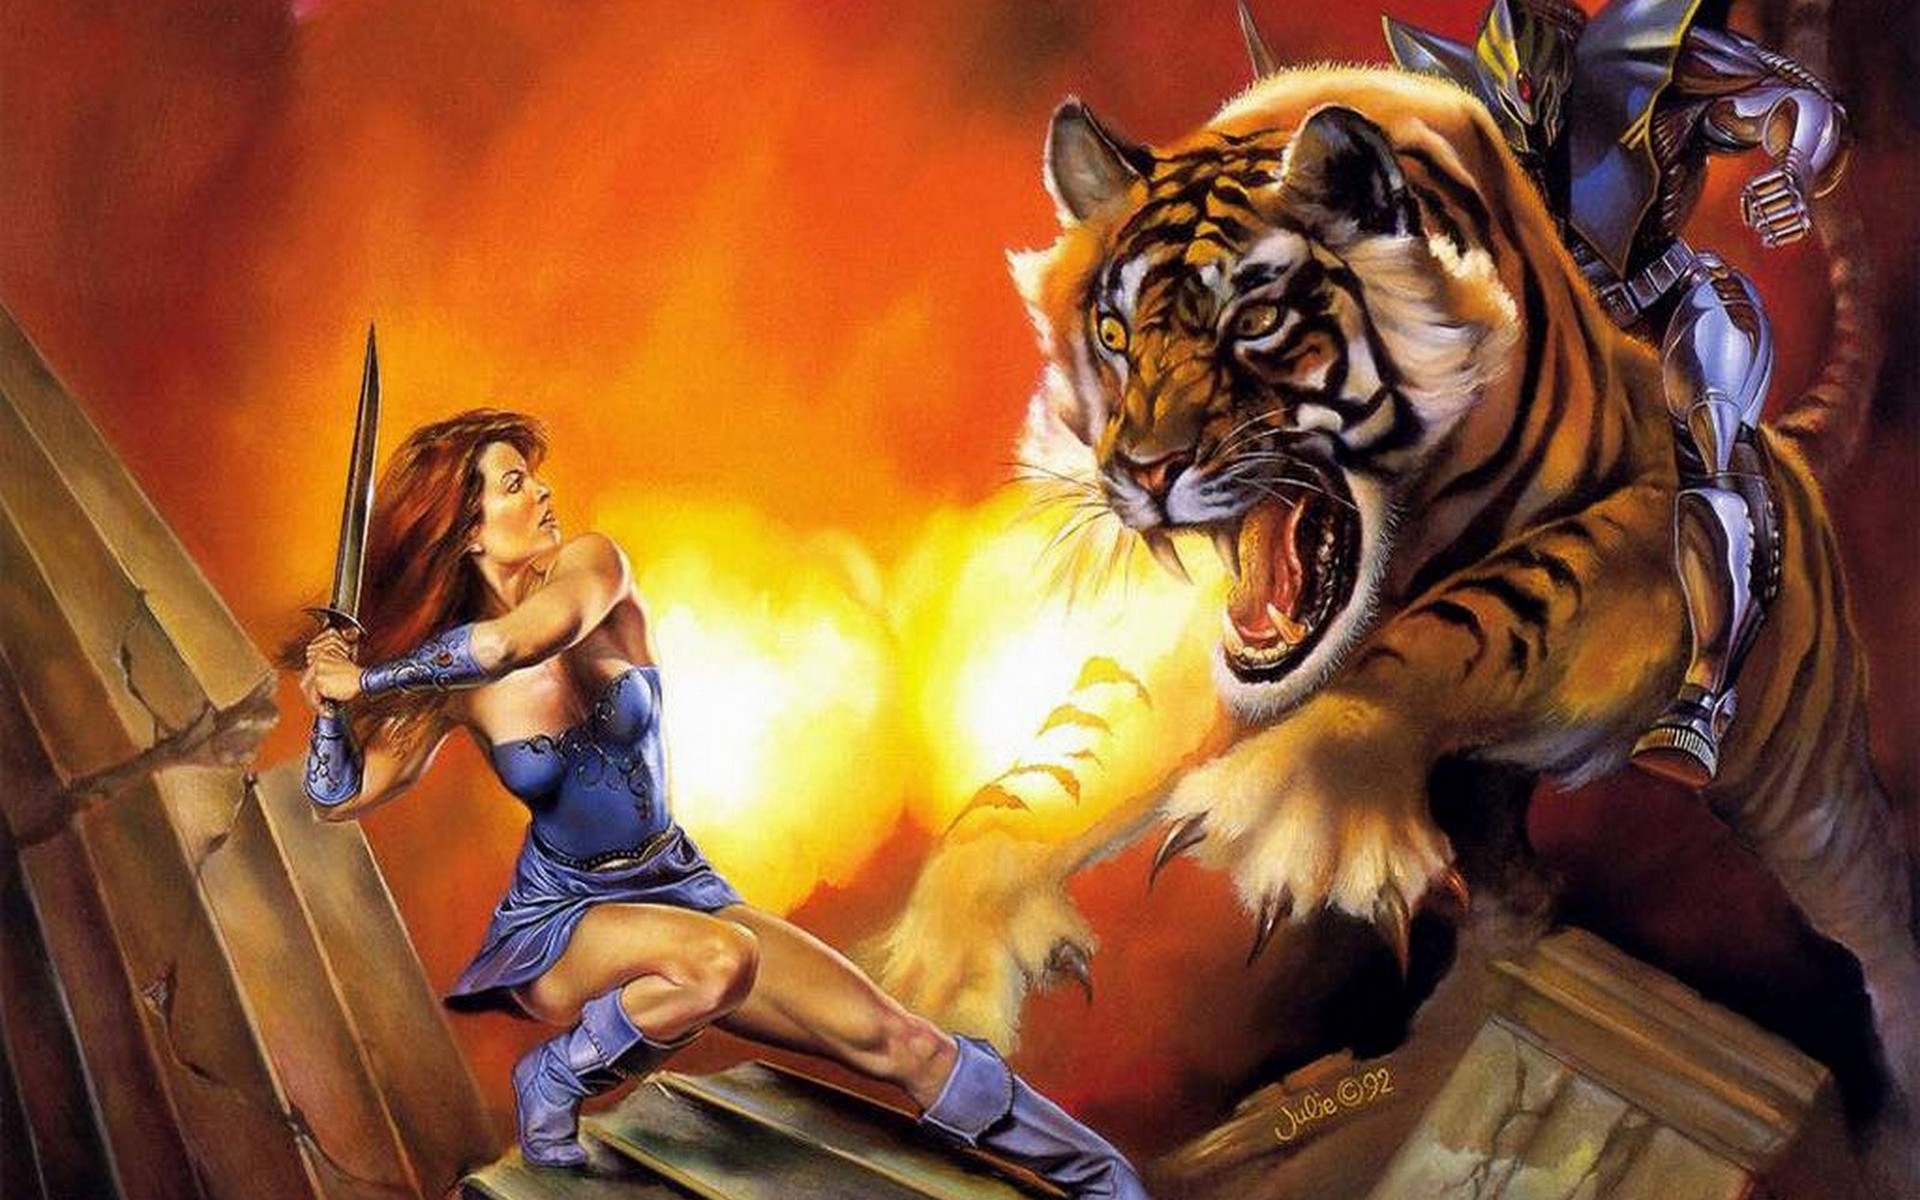 Wallpapers tiger girl knight on the desktop